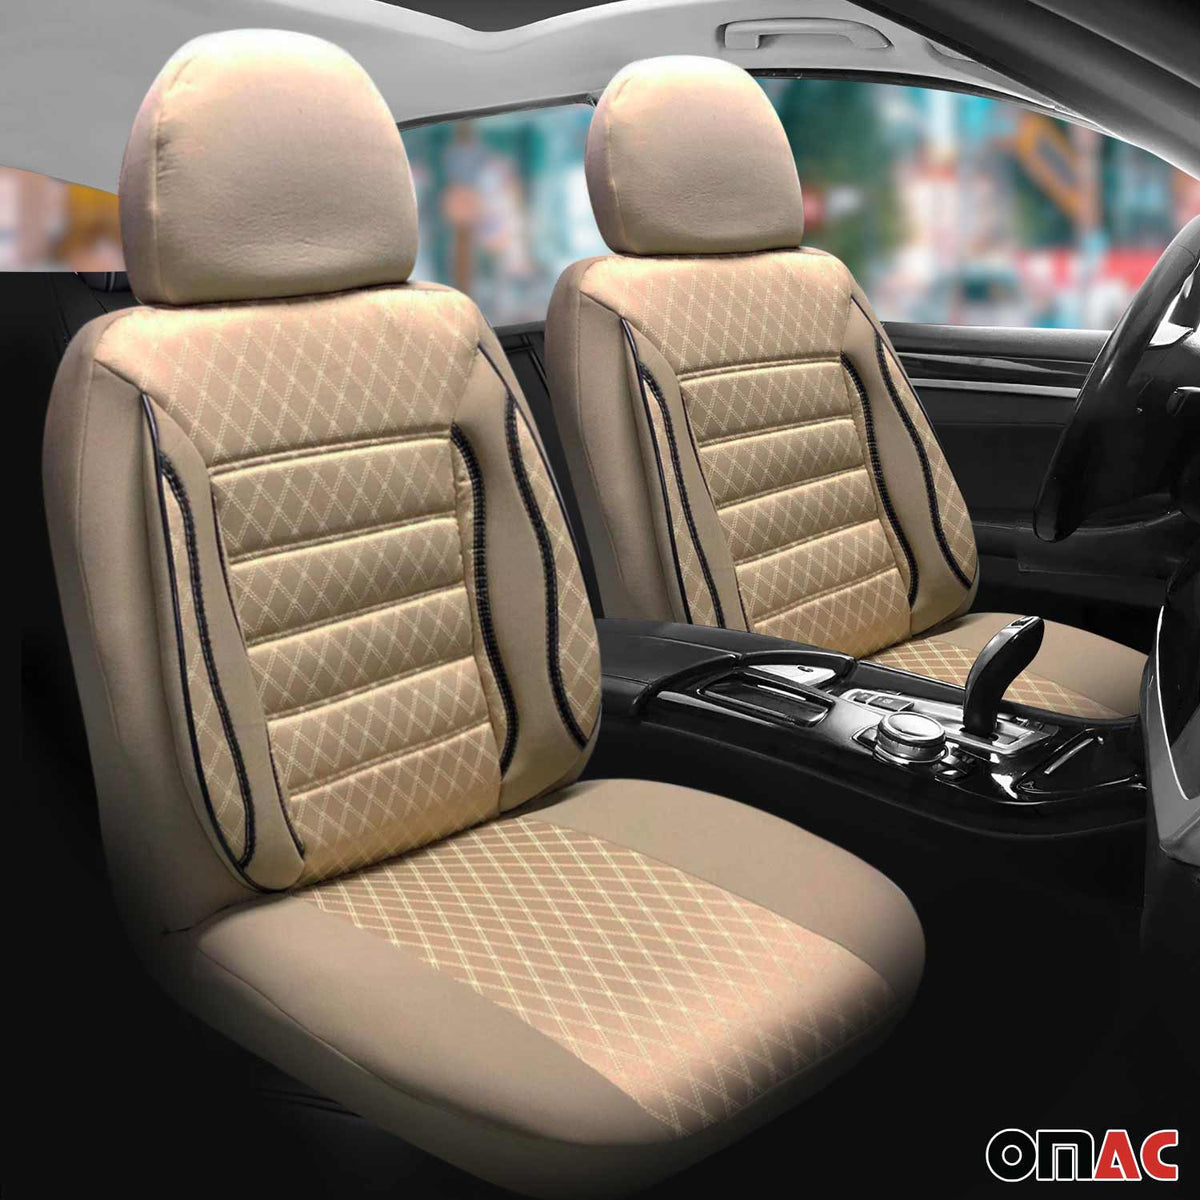 Seat covers protective covers for Jeep Cherokee Commander Compass Beige 2 seats front